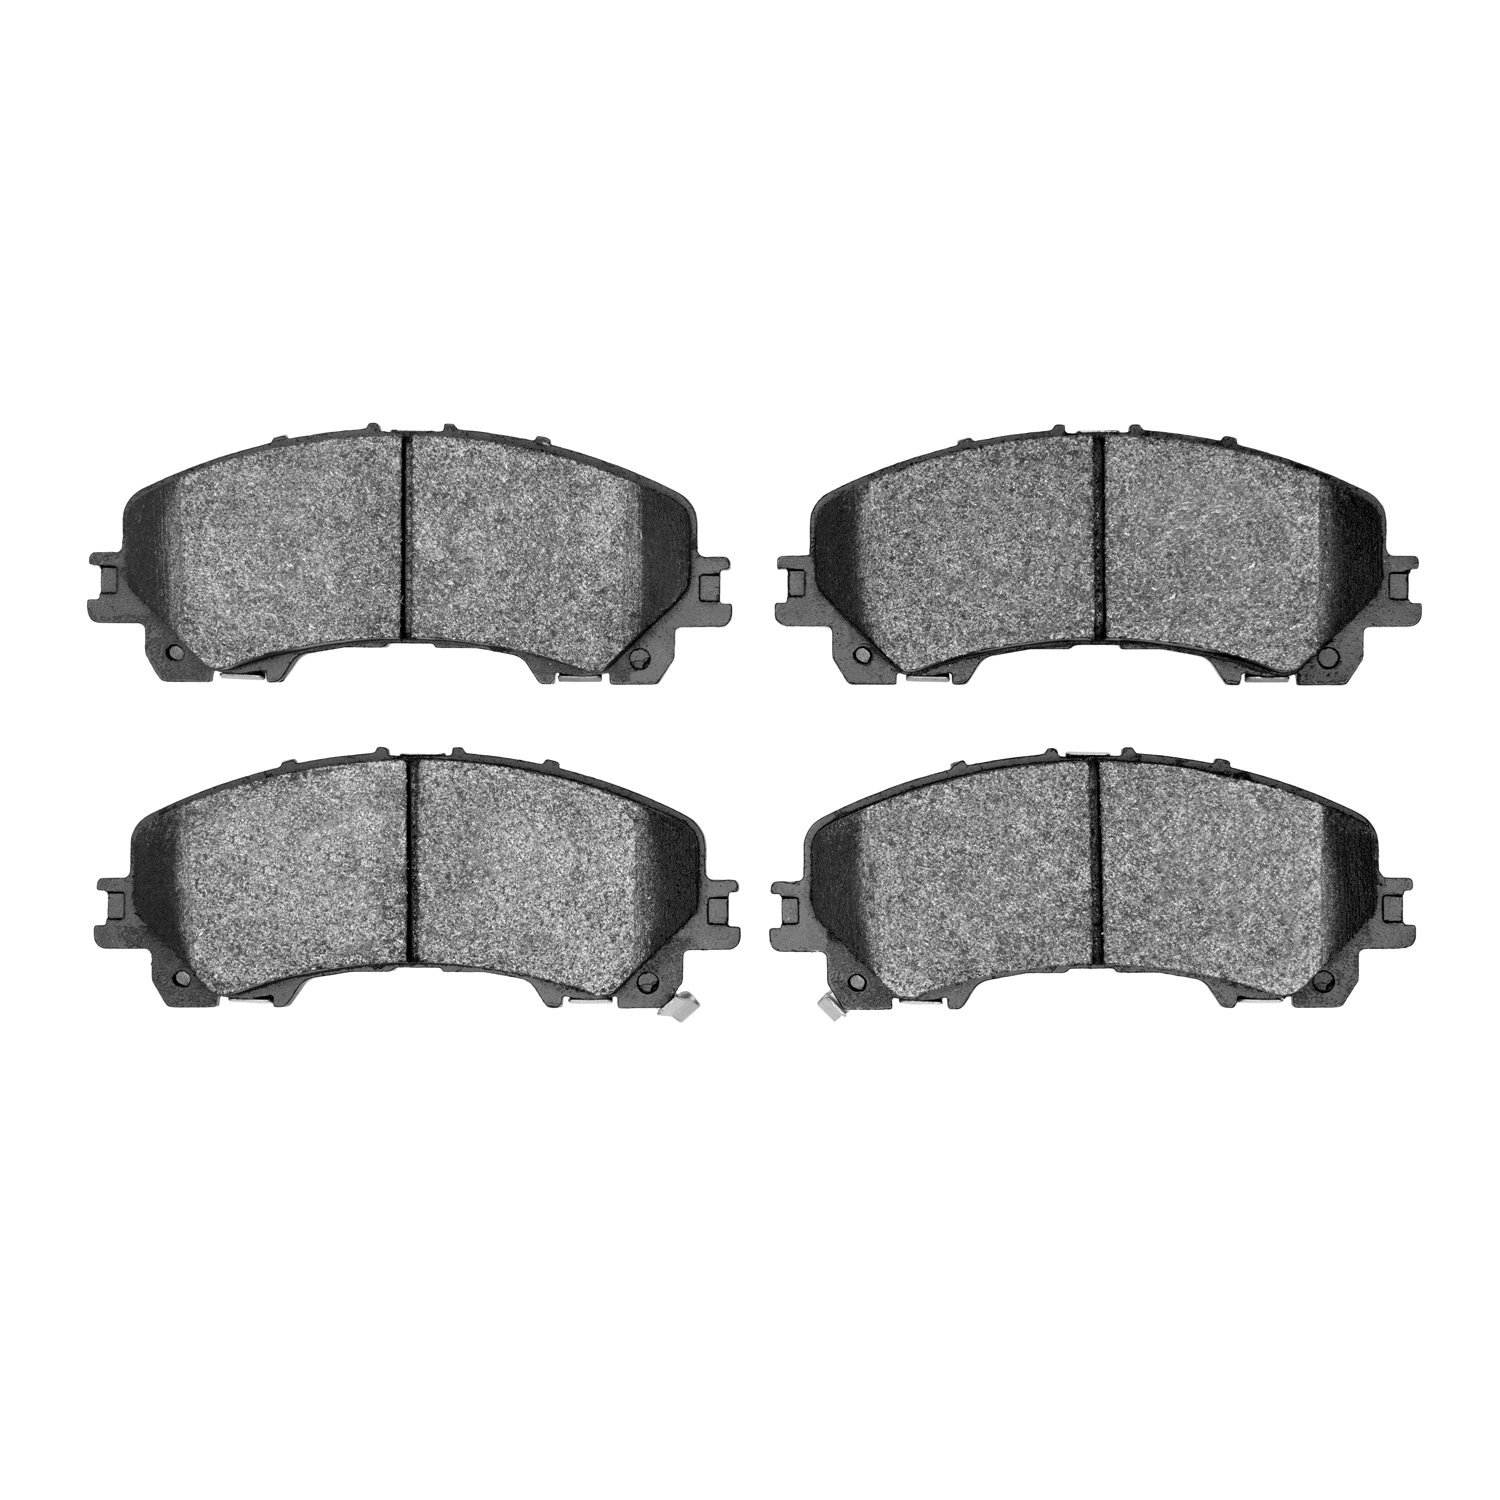 1551-1736-00 5000 Advanced Ceramic Brake Pads, Fits Select Infiniti/Nissan, Position: Front